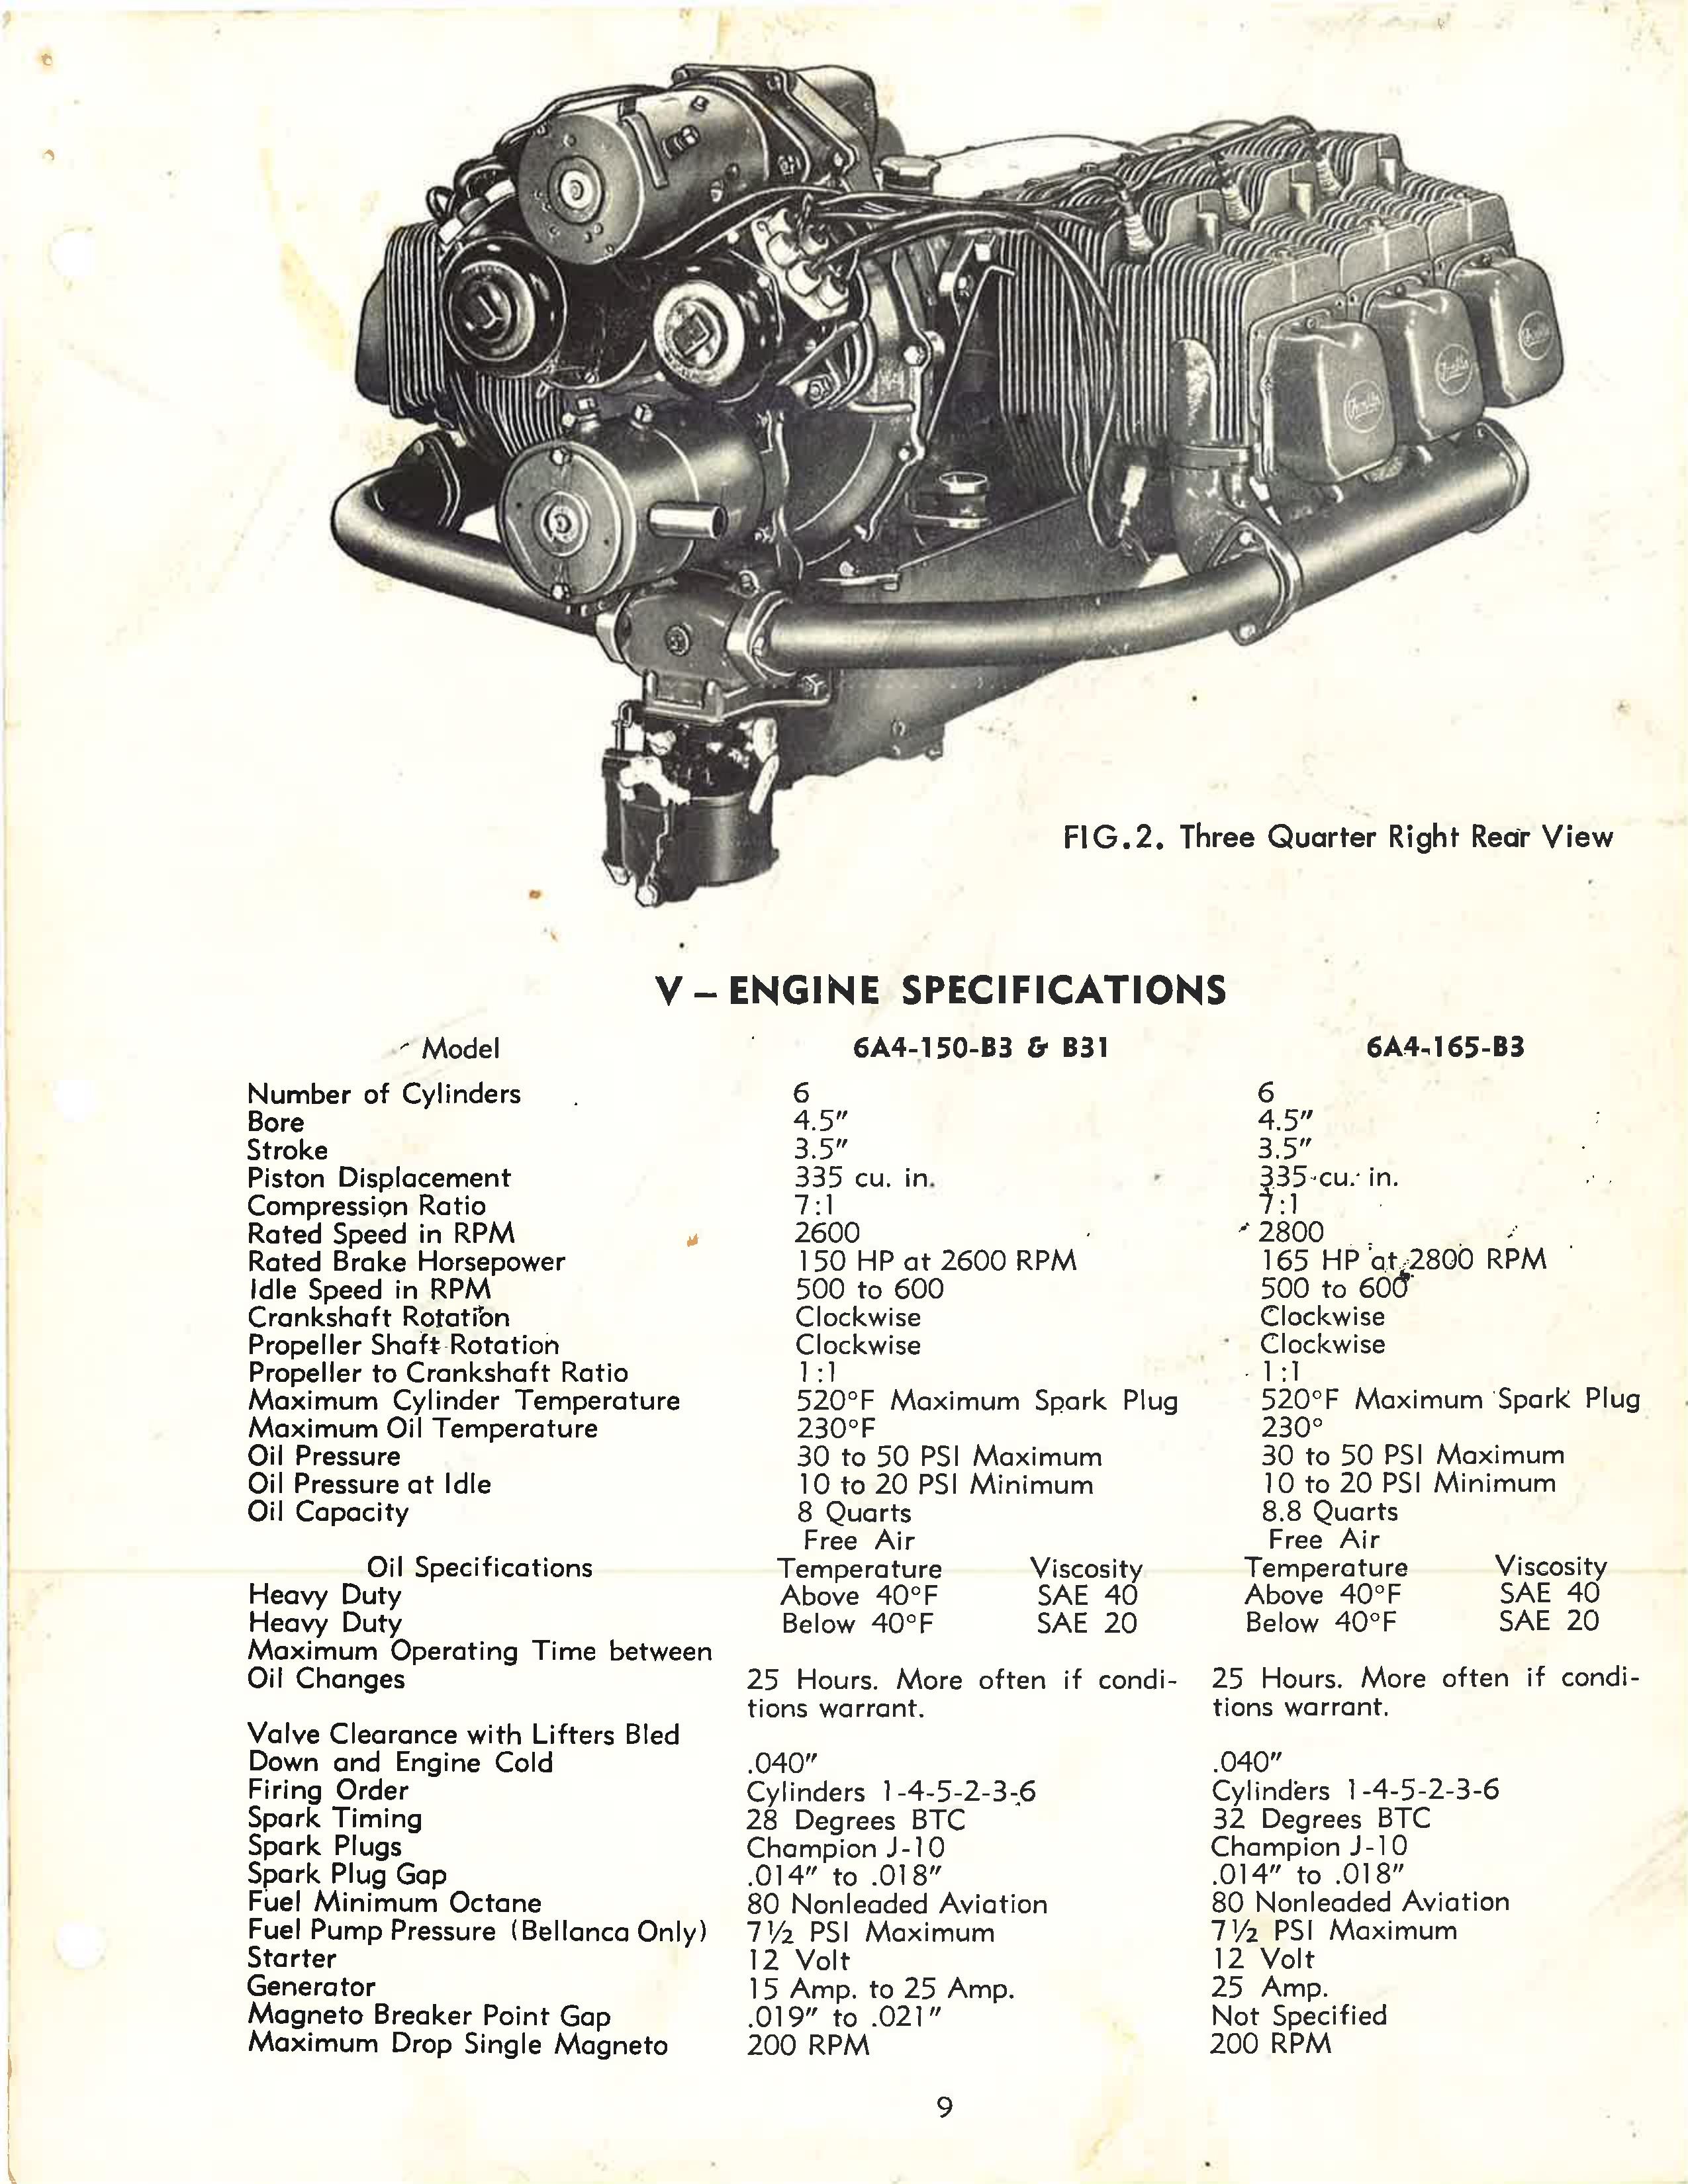 Sample page 10 from AirCorps Library document: Service Manual for Engine Models 6A4-150-B3 and 6A4-165-B3